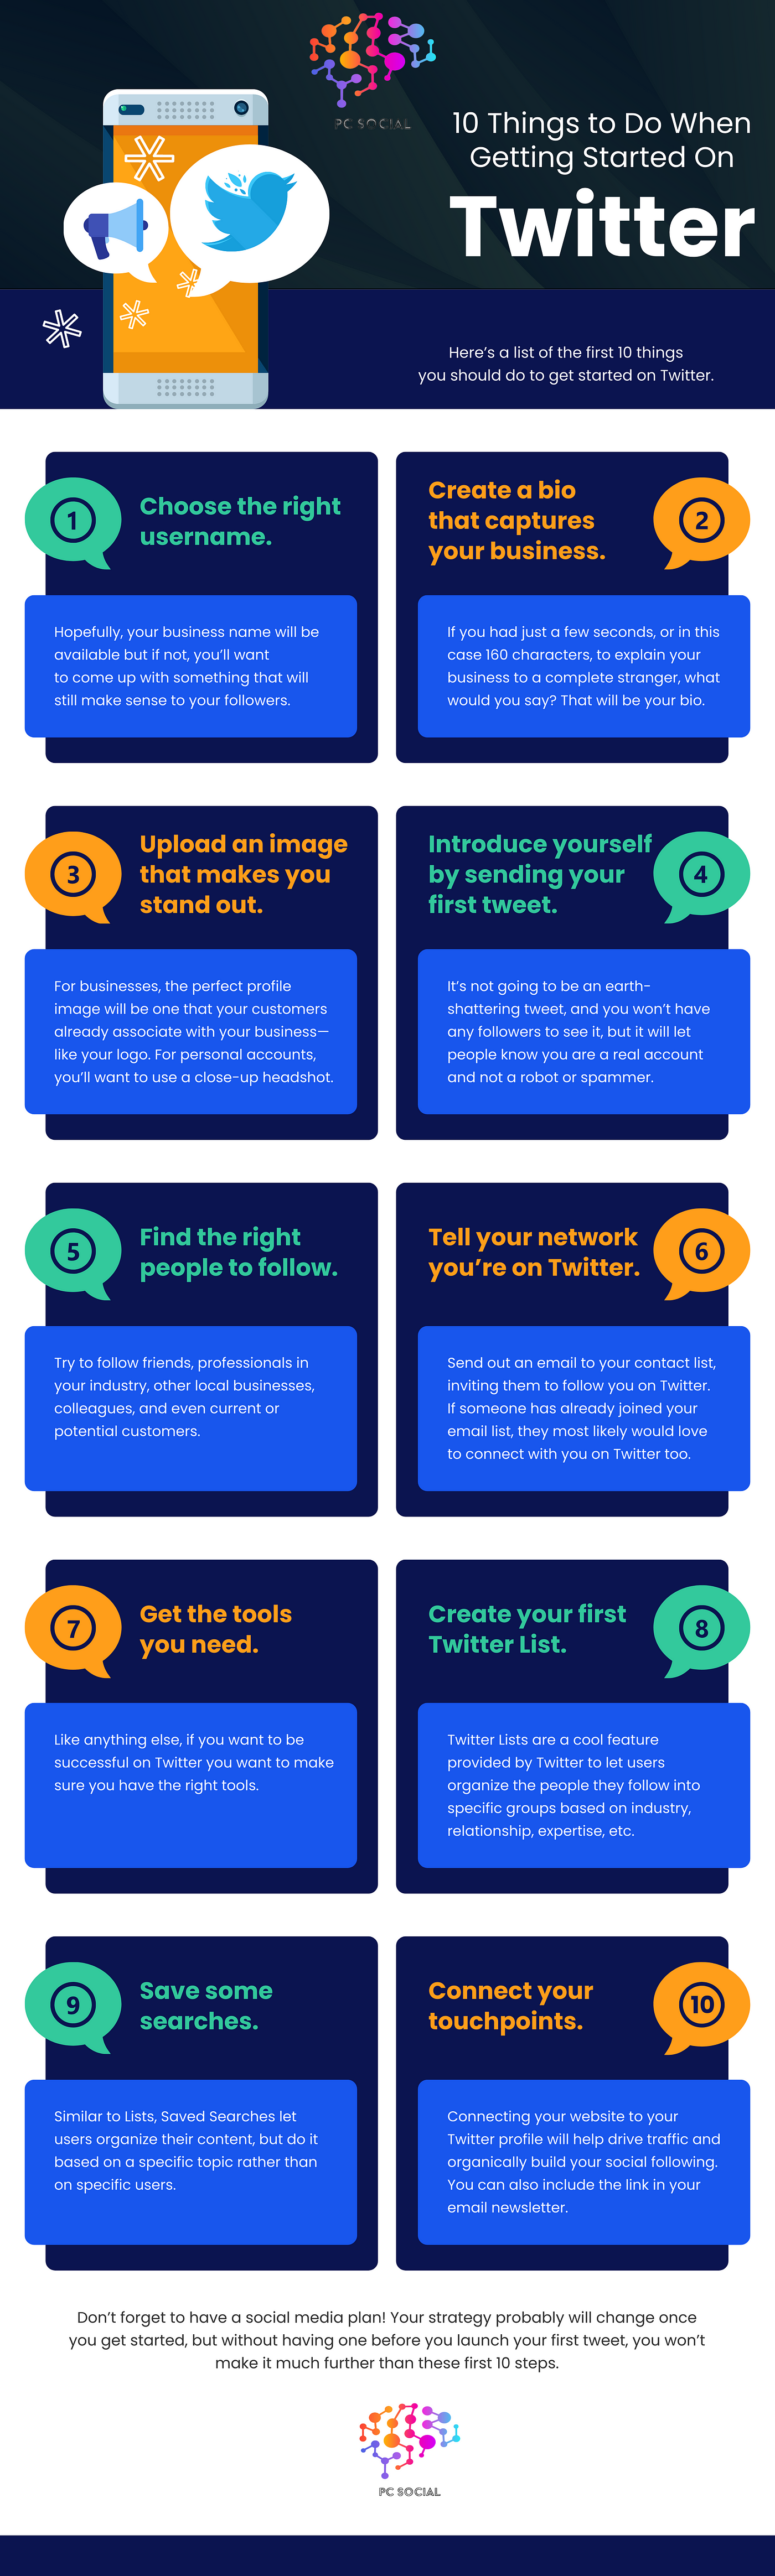 How to Follow Topics on Twitter - A Complete Guide for Everyone